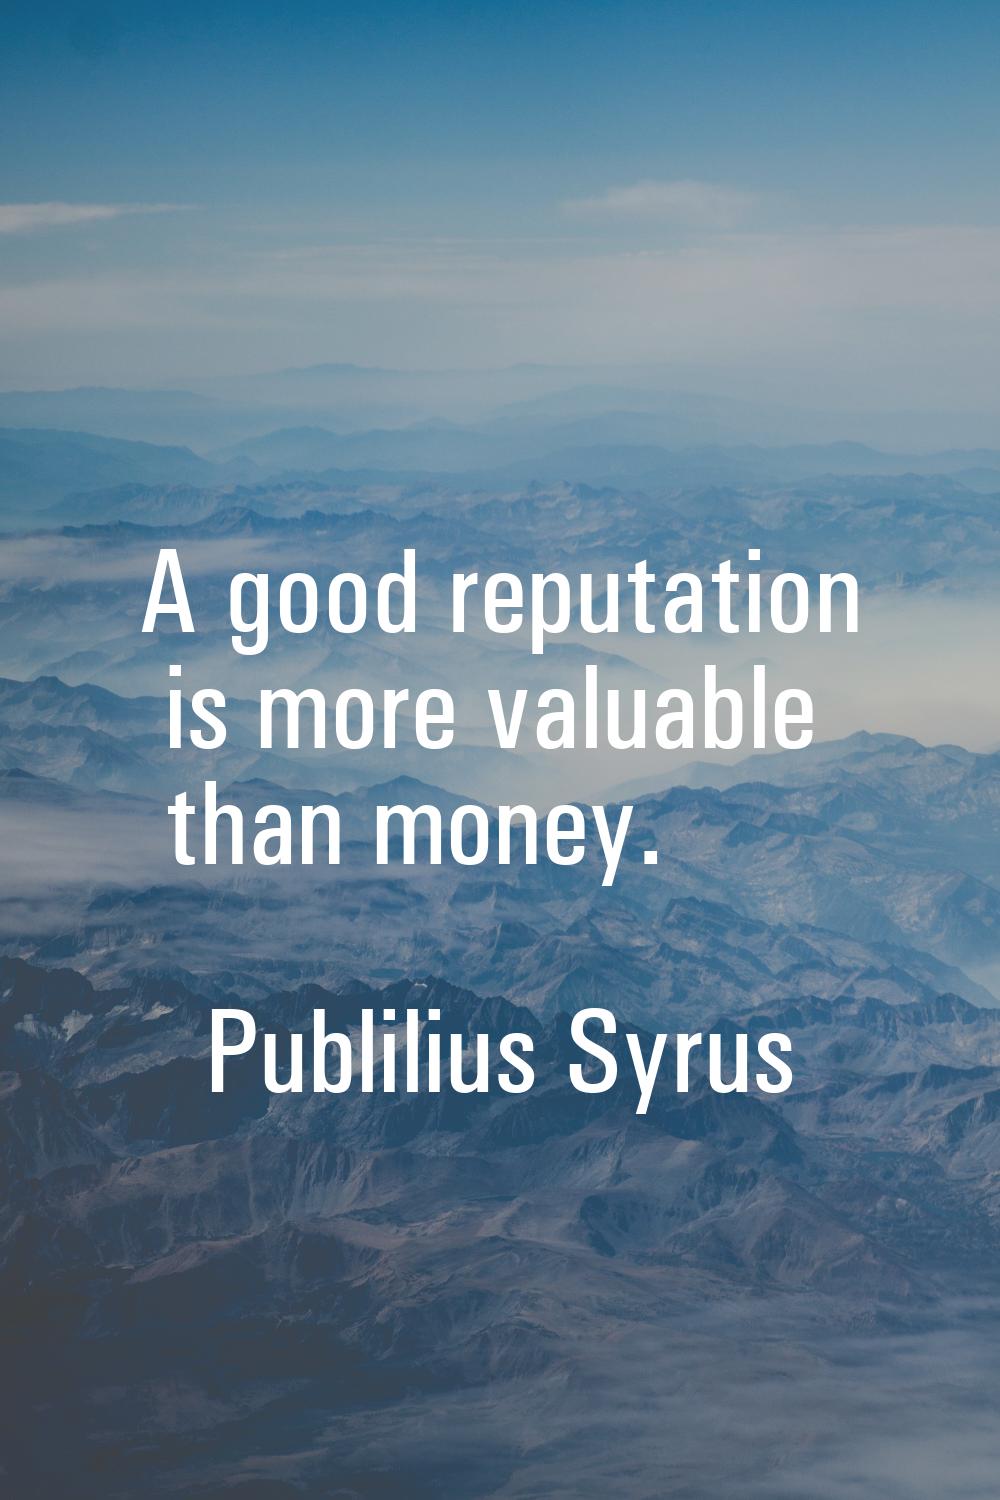 A good reputation is more valuable than money.